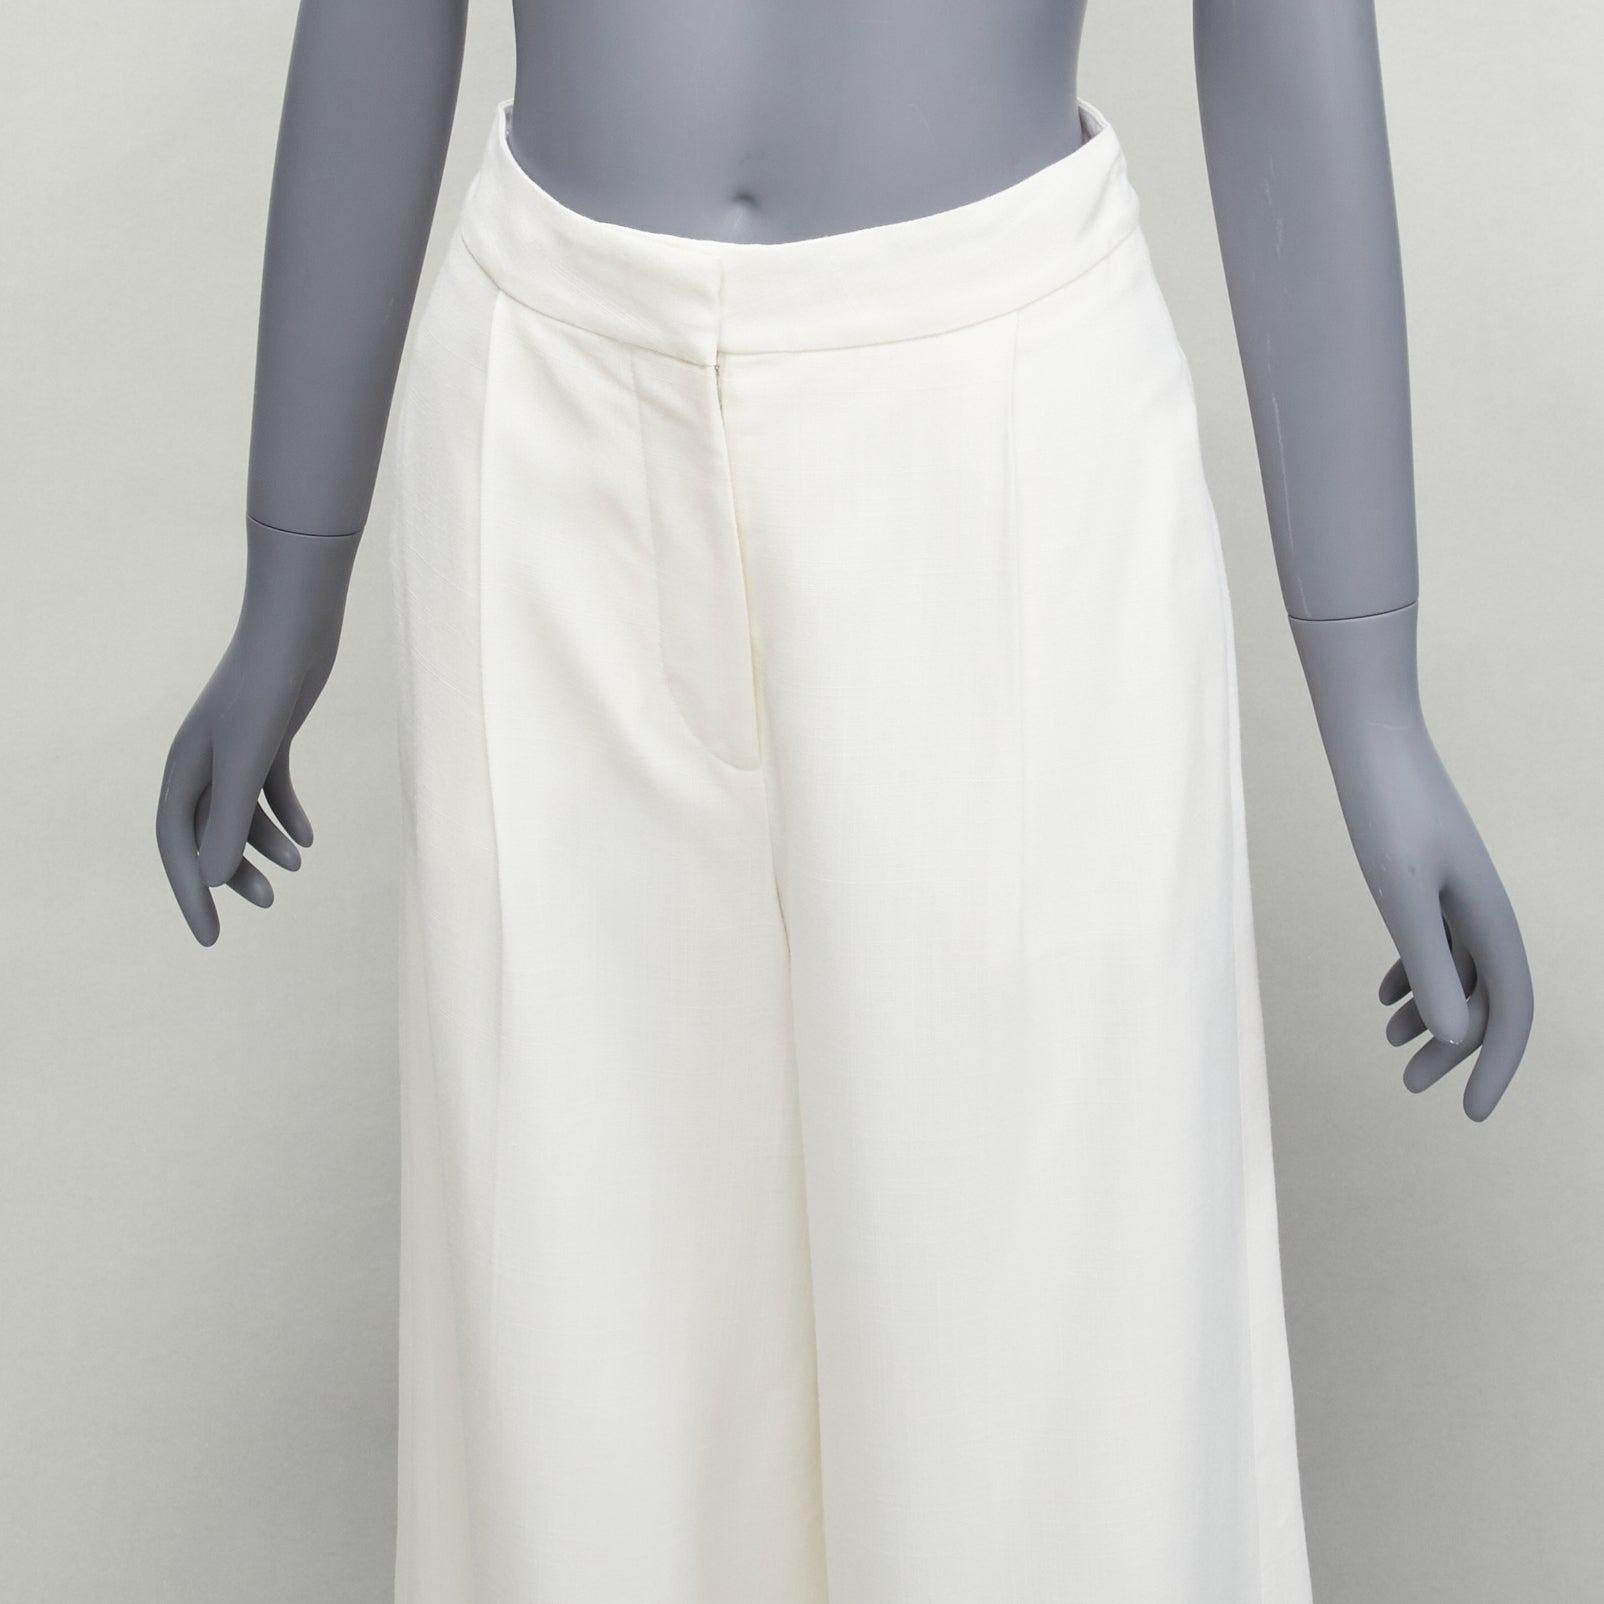 STELLA MCCARTNEY 2017 white silk lined front pleats culotte pants IT34 XXS
Reference: SNKO/A00295
Brand: Stella McCartney
Designer: Stella McCartney
Collection: 2017
Material: Viscose
Color: White
Pattern: Solid
Closure: Zip Fly
Lining: White